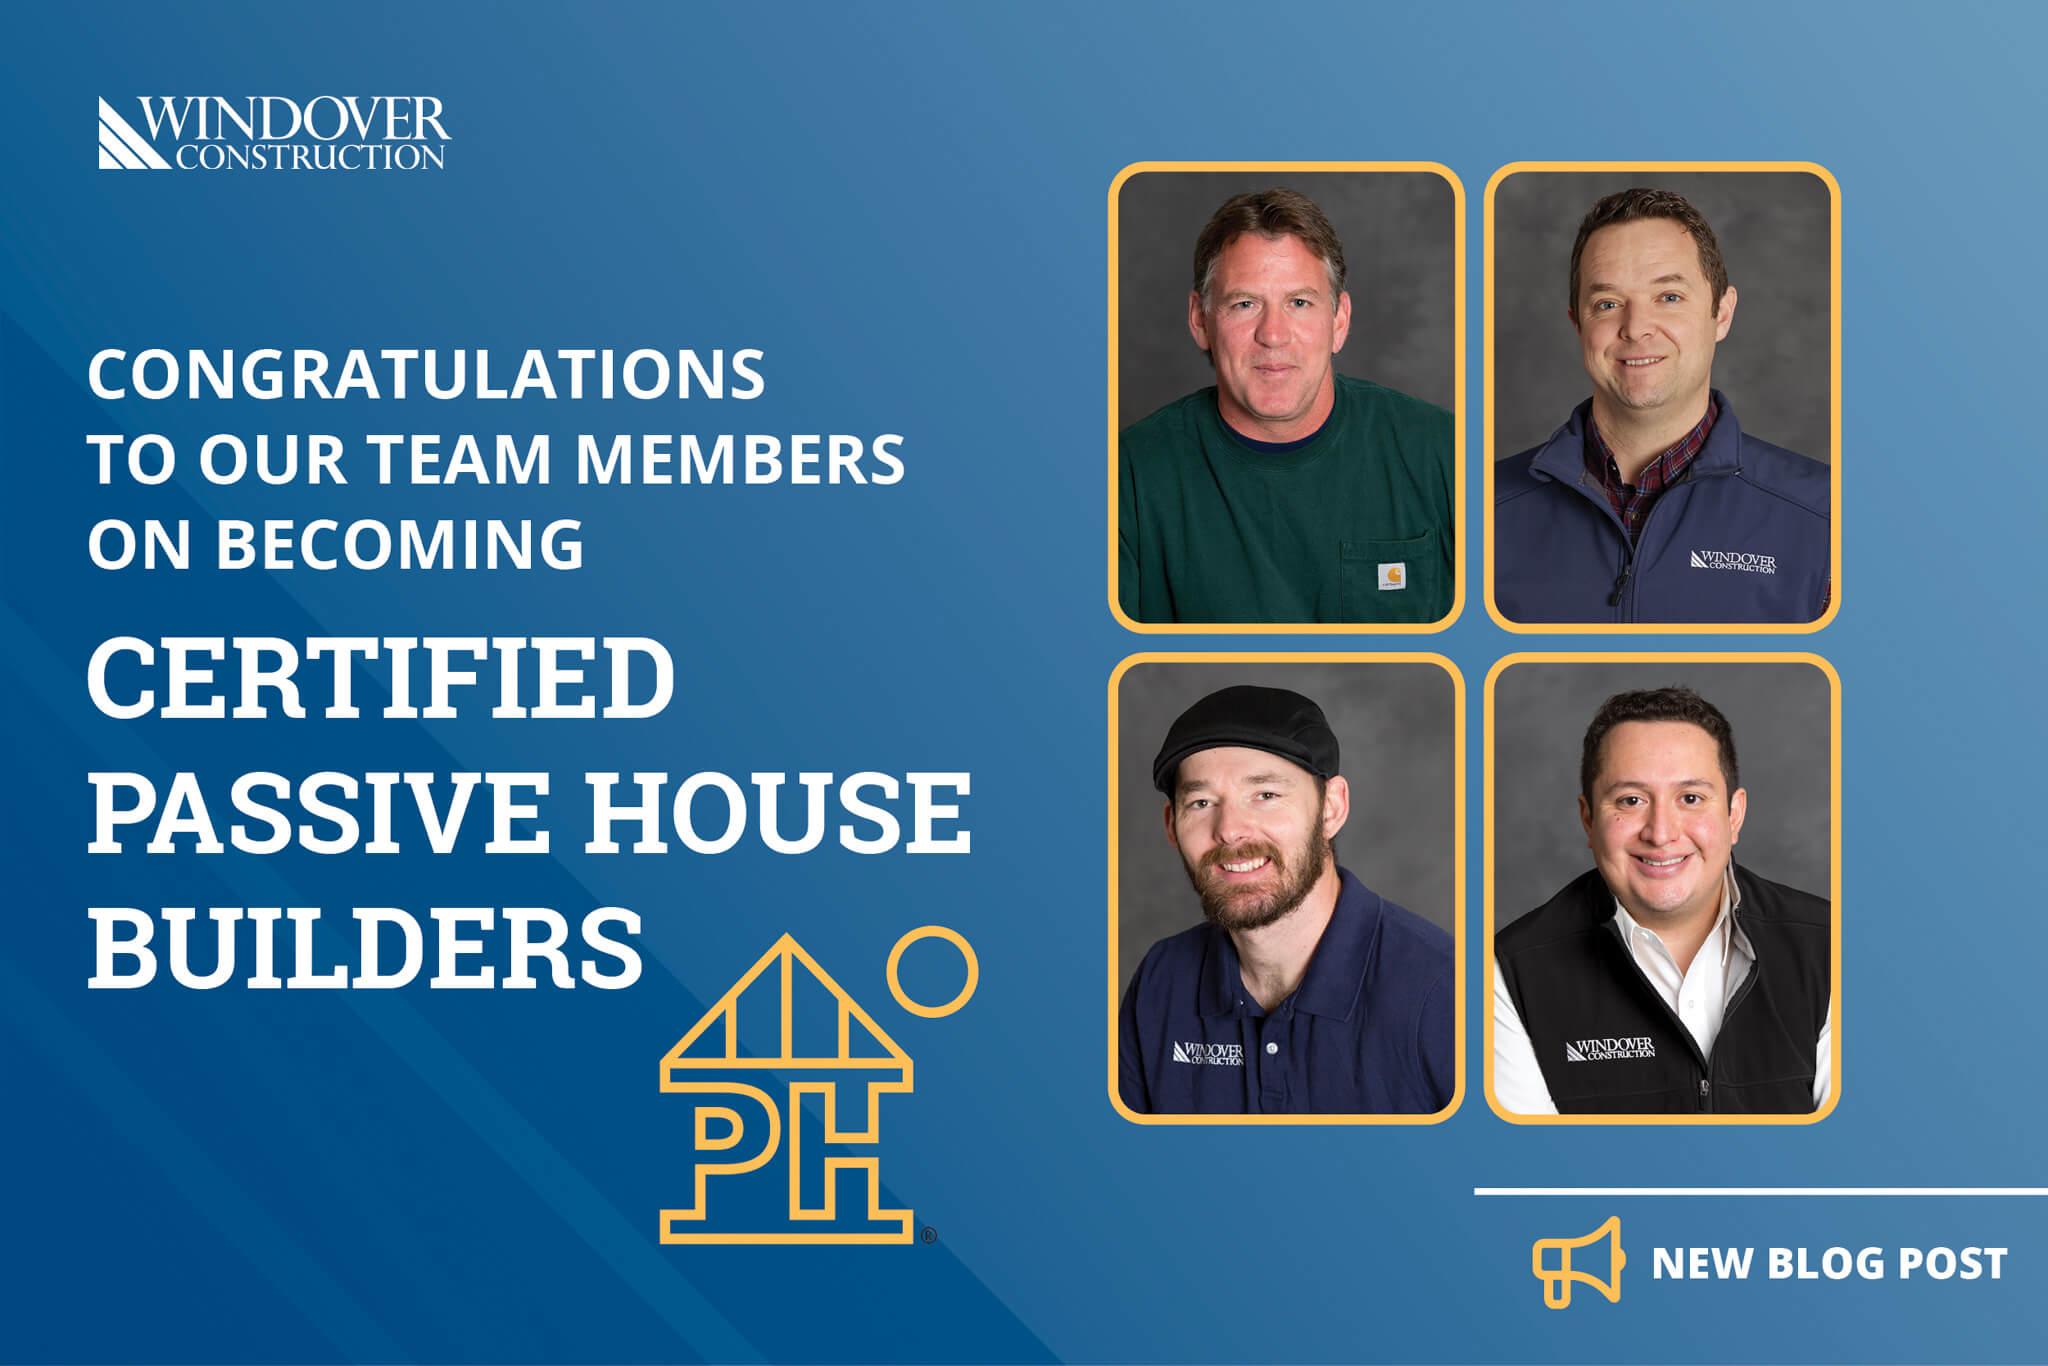 Windover Employees Become Certified Passive House Builders